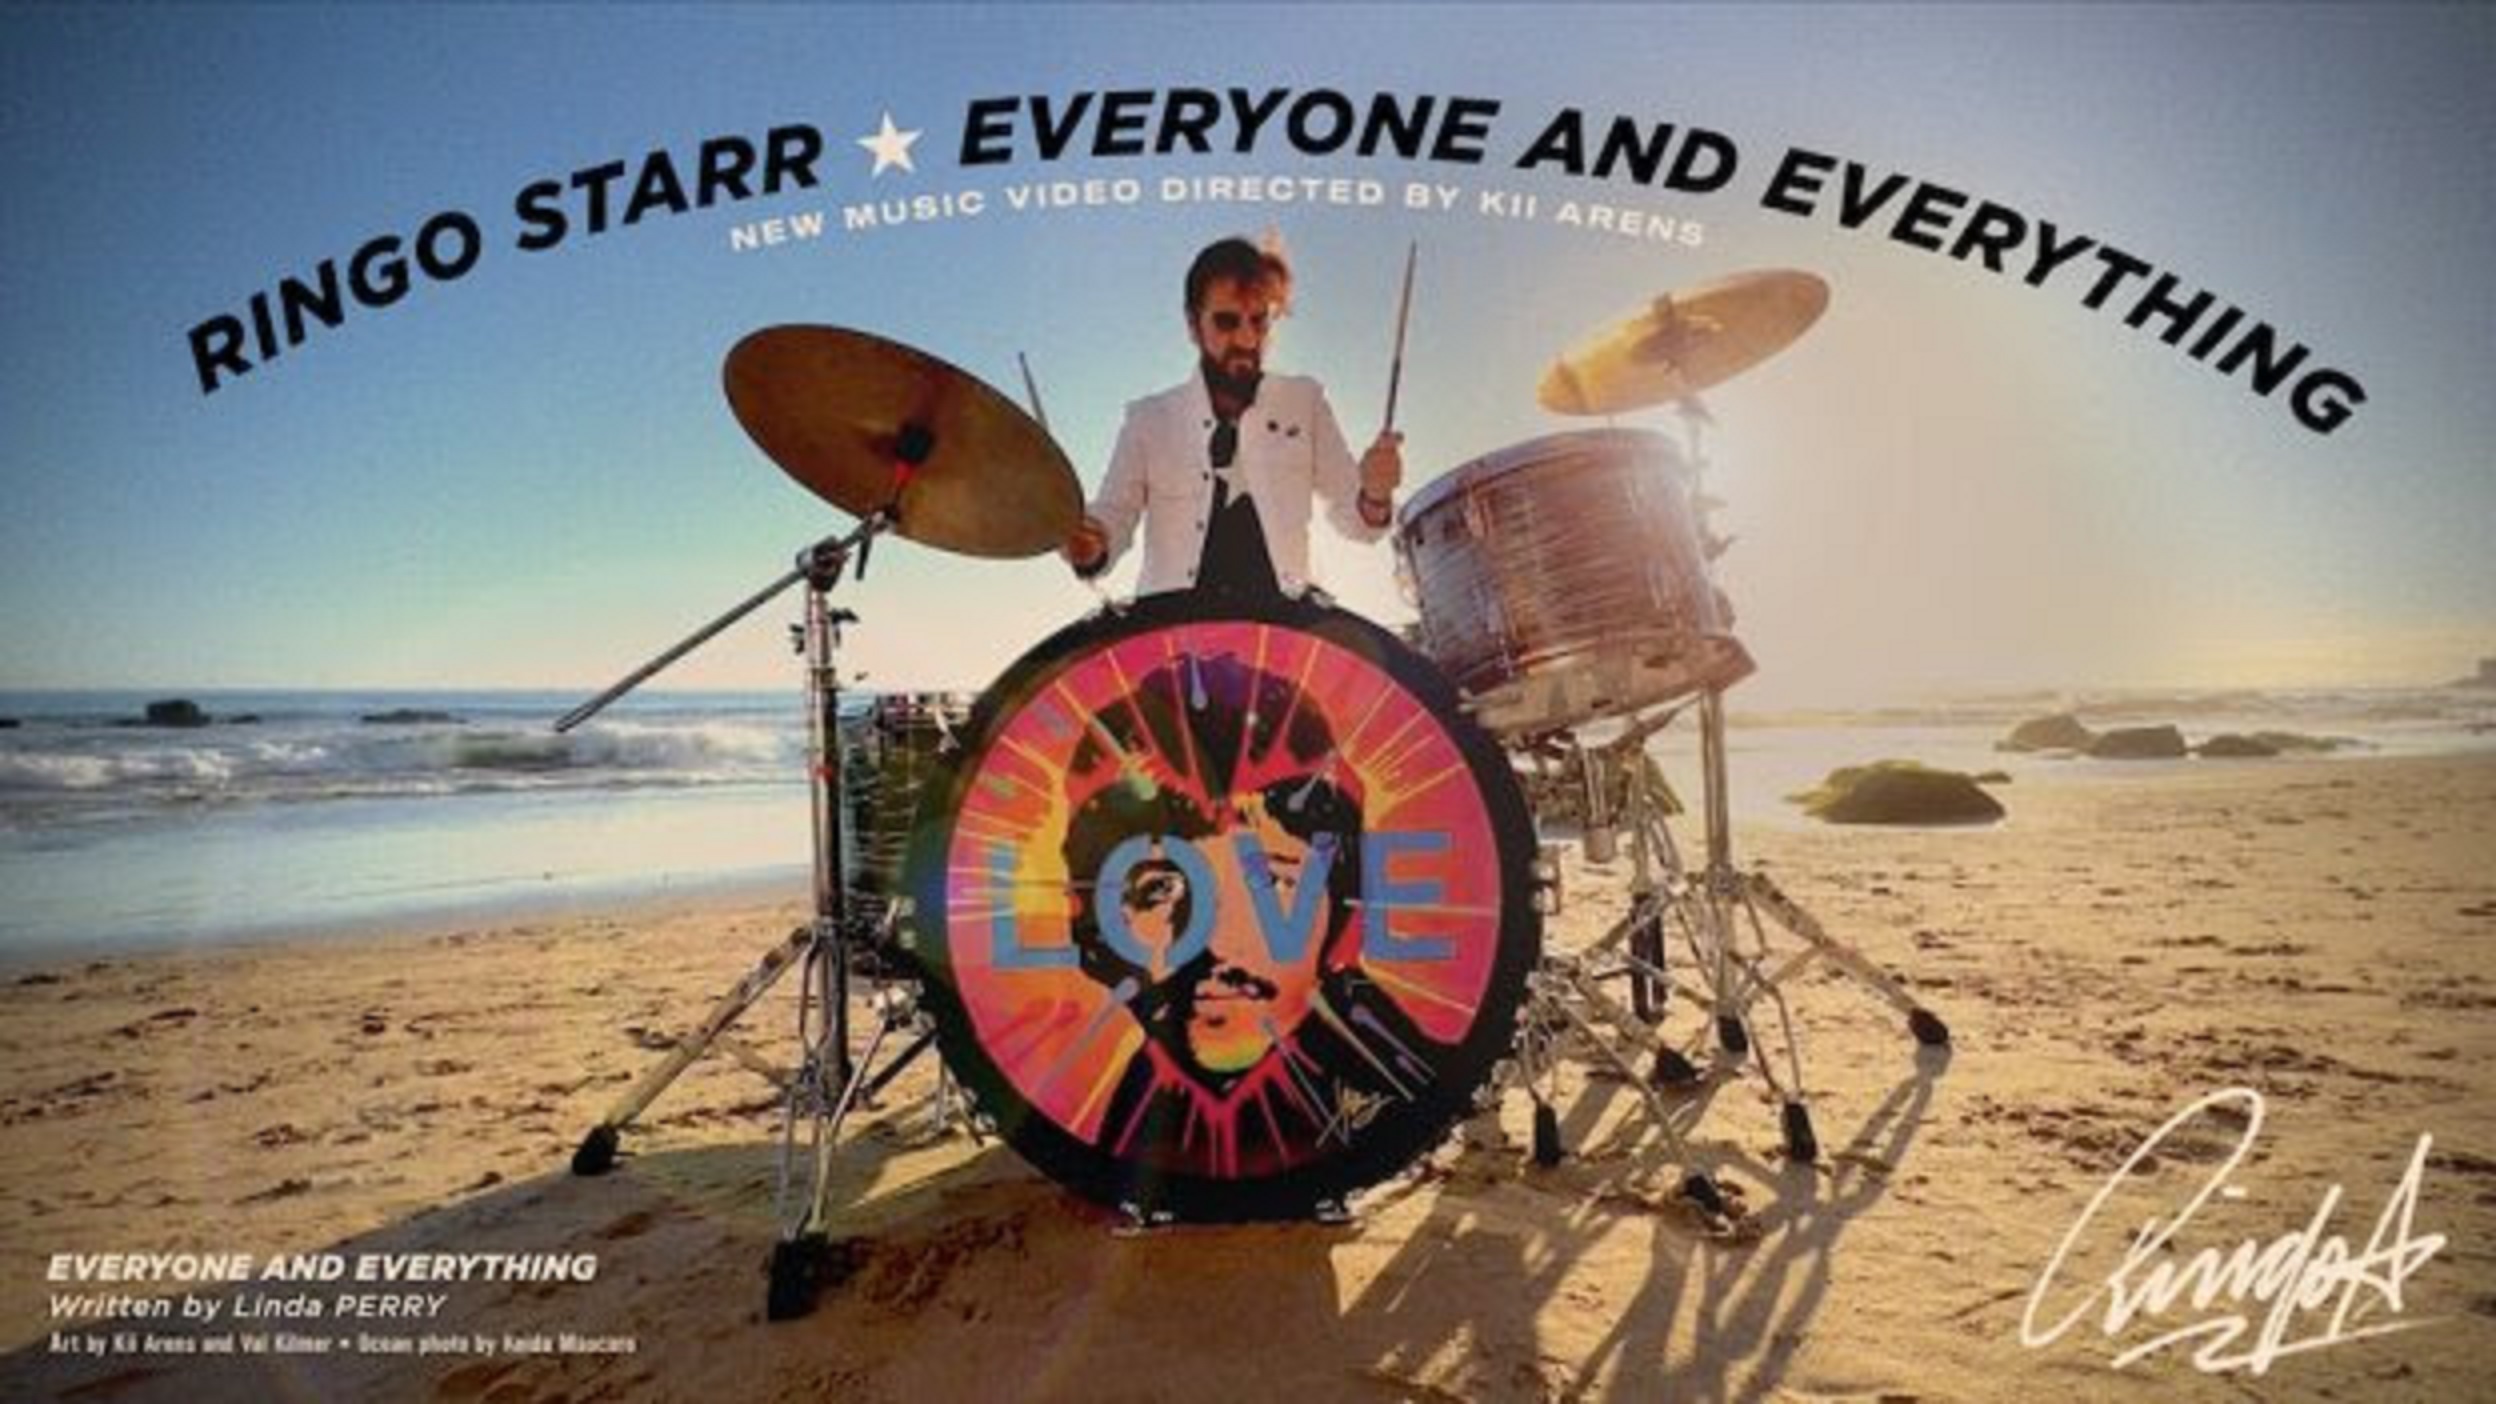 Ringo Starr’s 'EP3' Featuring 4 New Tracks, Out Today On Vinyl